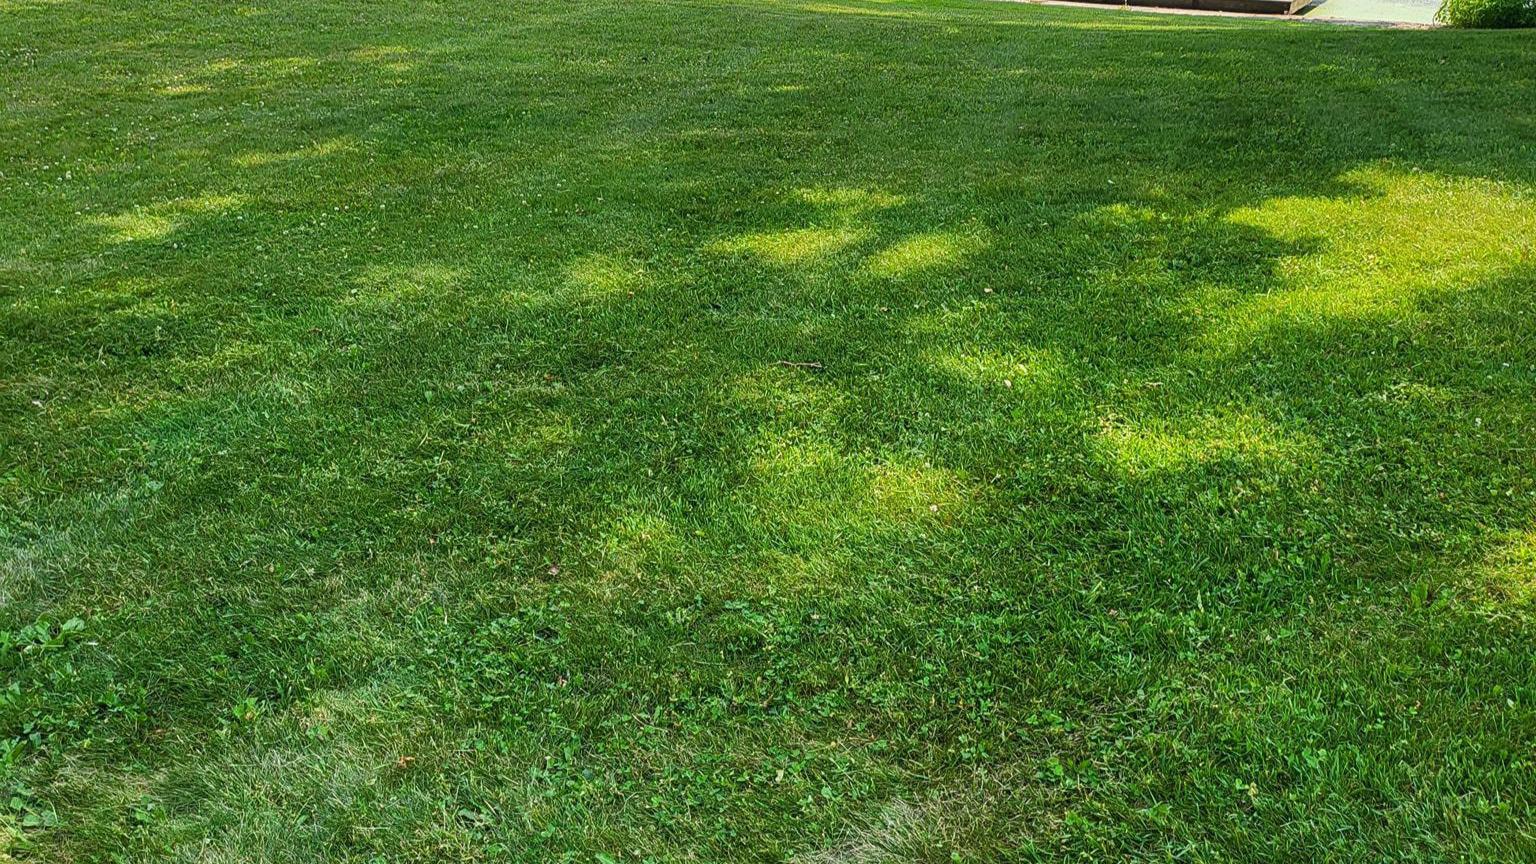 Keep your lawn in top condition with Radomski Snow Removal & Lawncare's comprehensive lawn maintenance services. Our owner, Kenneth, provides expert care for your lawn, including mowing, edging, trimming, and more. With our proactive approach to lawn maintenance, you can enjoy a healthy and beautiful lawn without the hassle of upkeep.